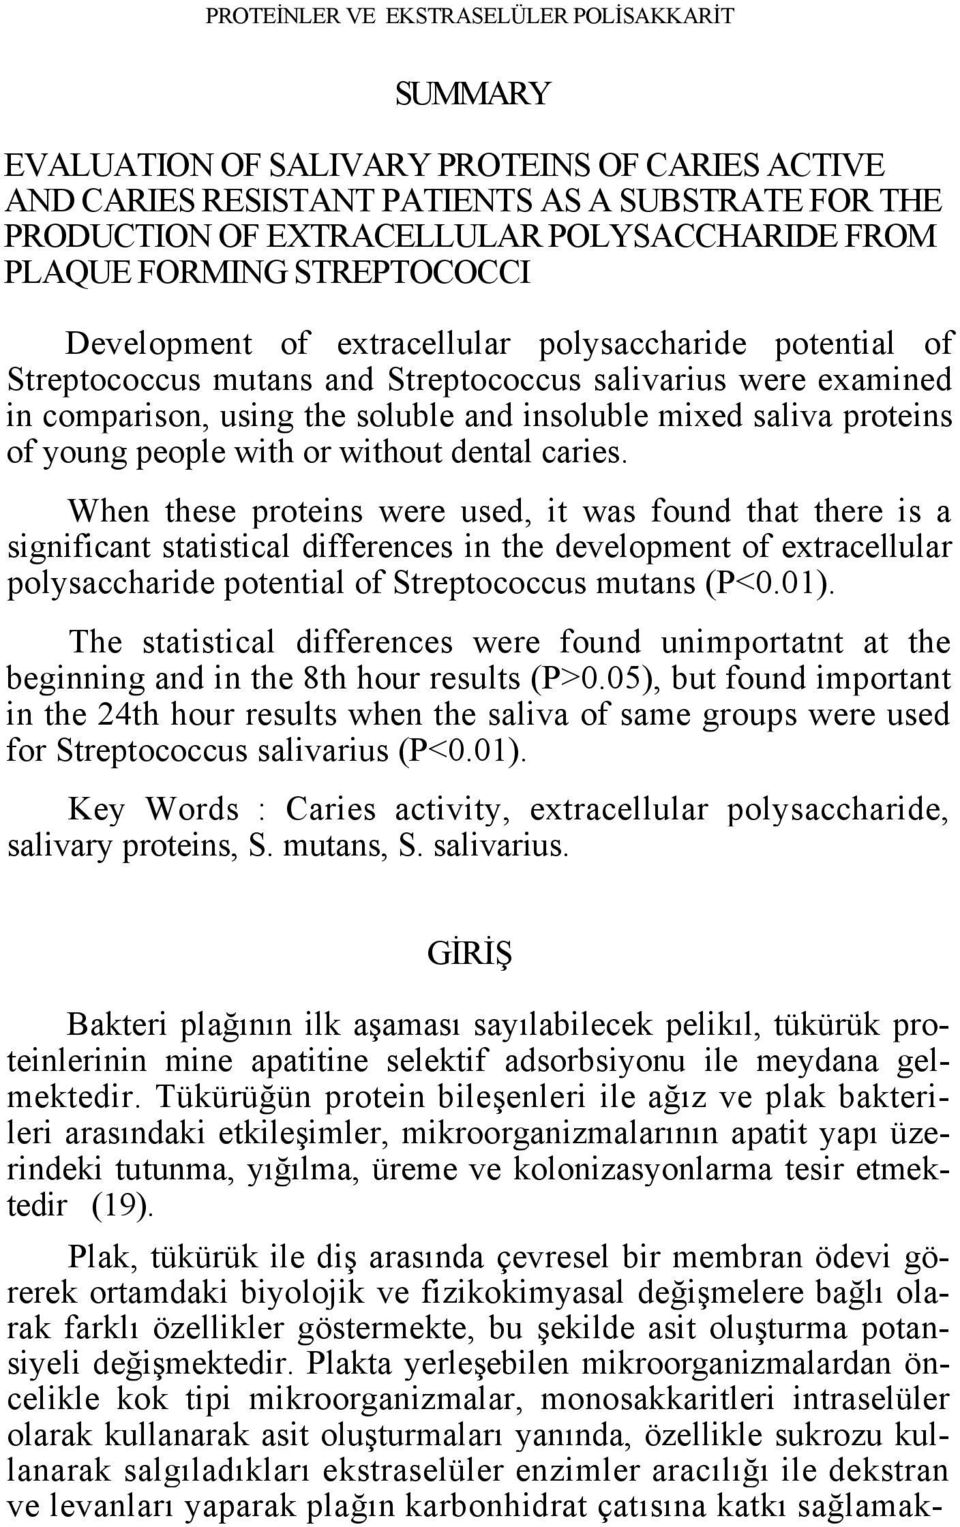 mixed saliva proteins of young people with or without dental caries.